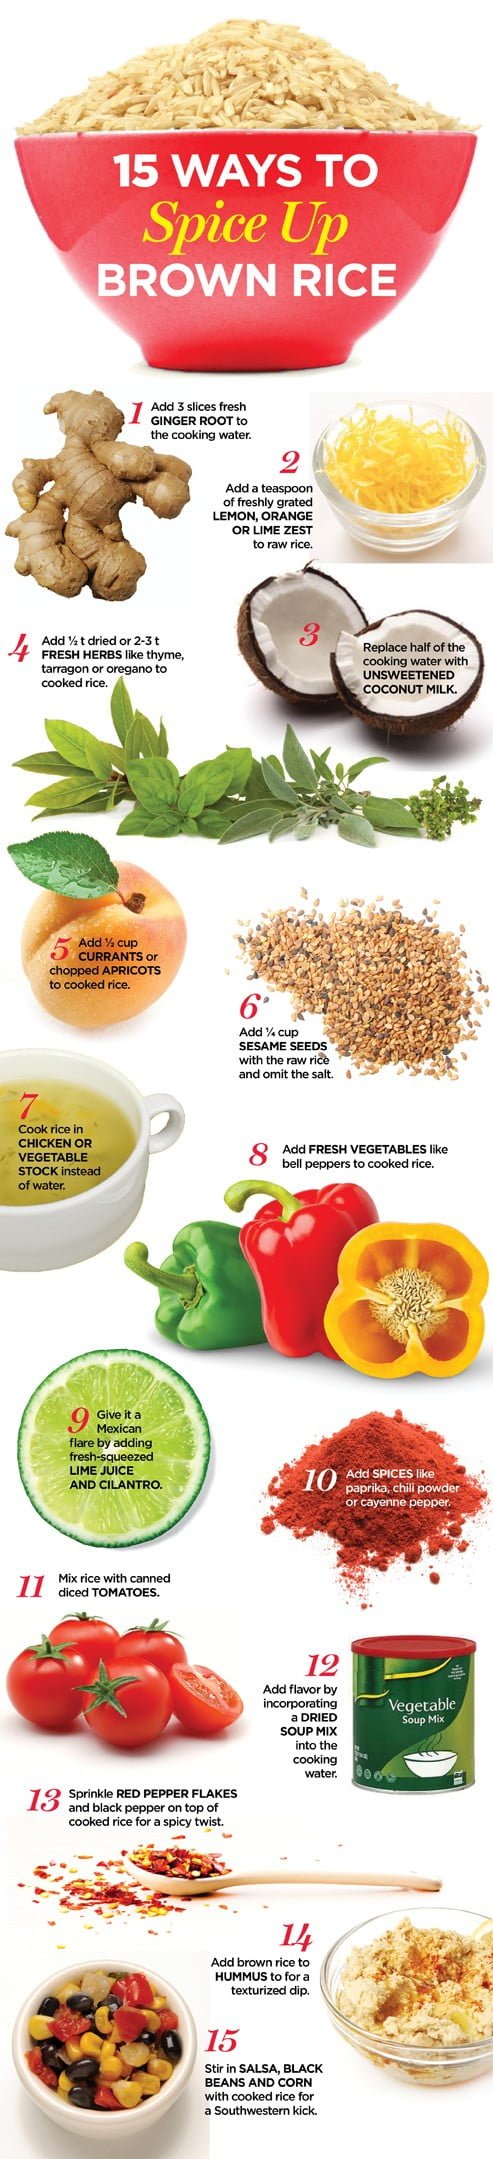 15 Ways To Spice Up Your Brown Rice Infographic